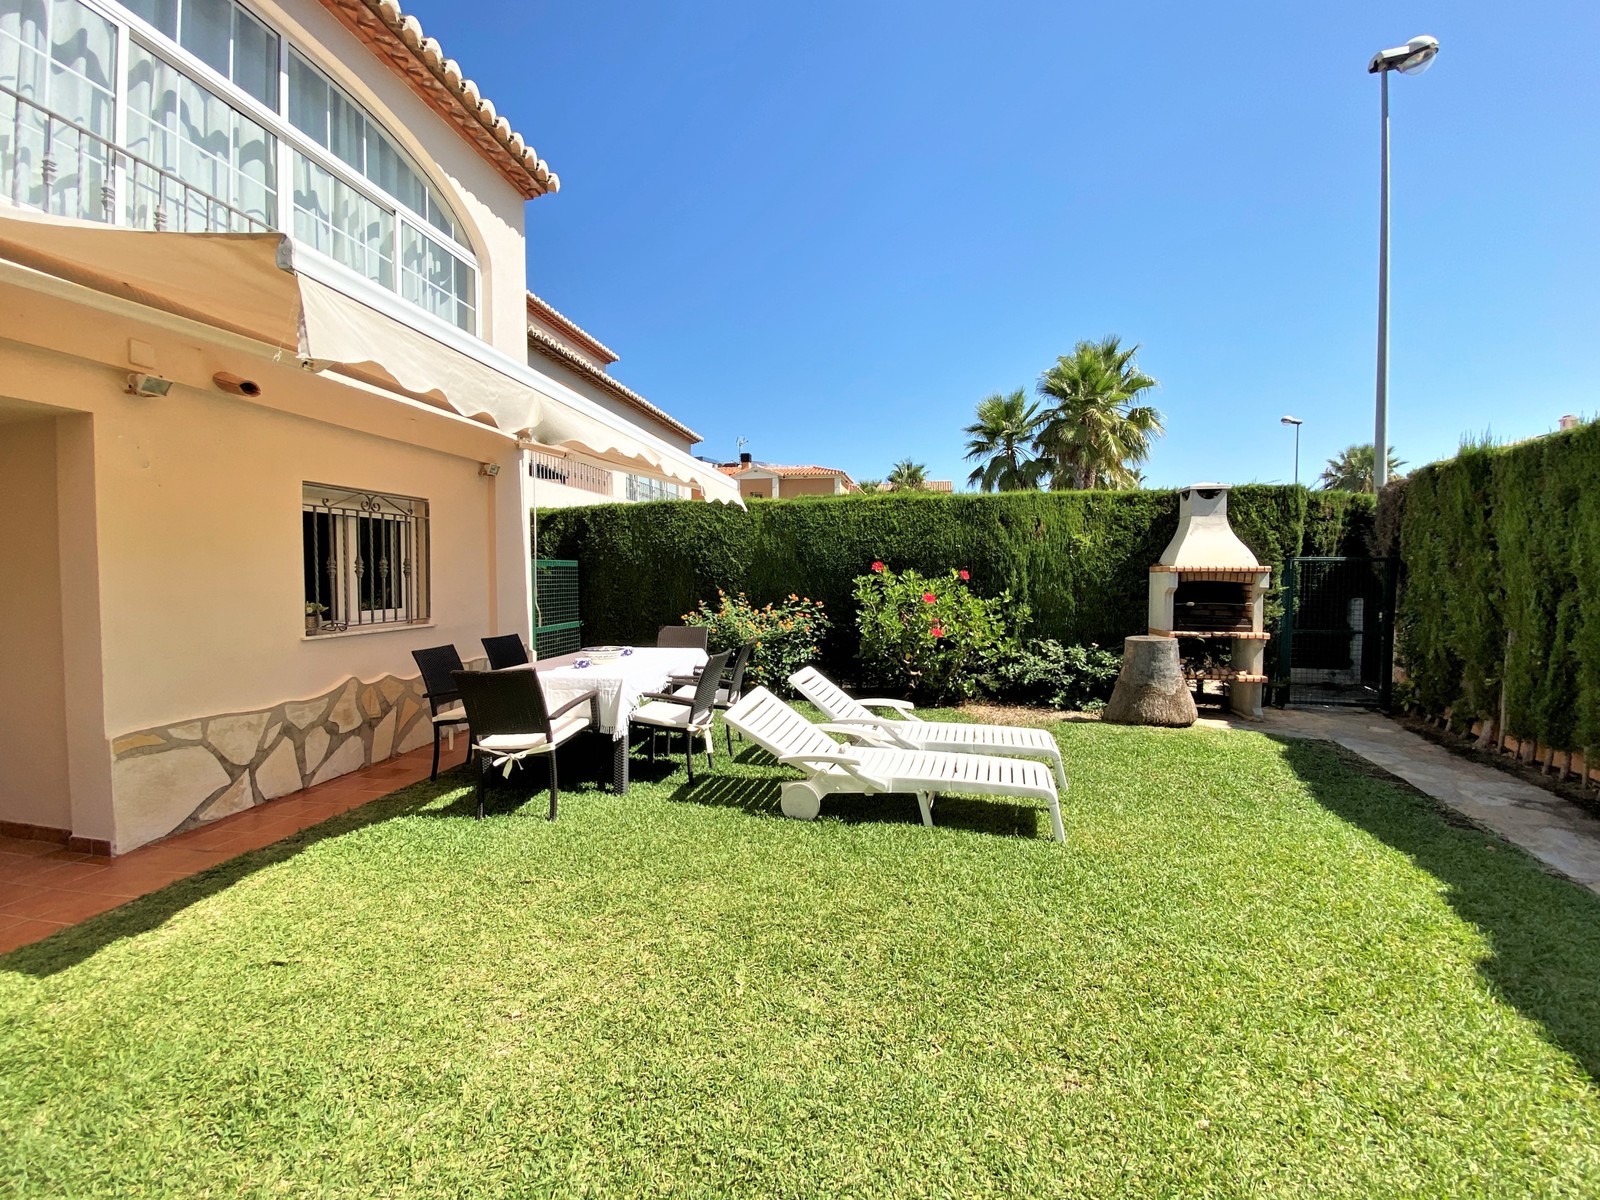 Excellent quality townhouse in the exclusive Oliva Nova with 4 bedrooms, 4 bathrooms, community pool, BBQ, patio, and more.